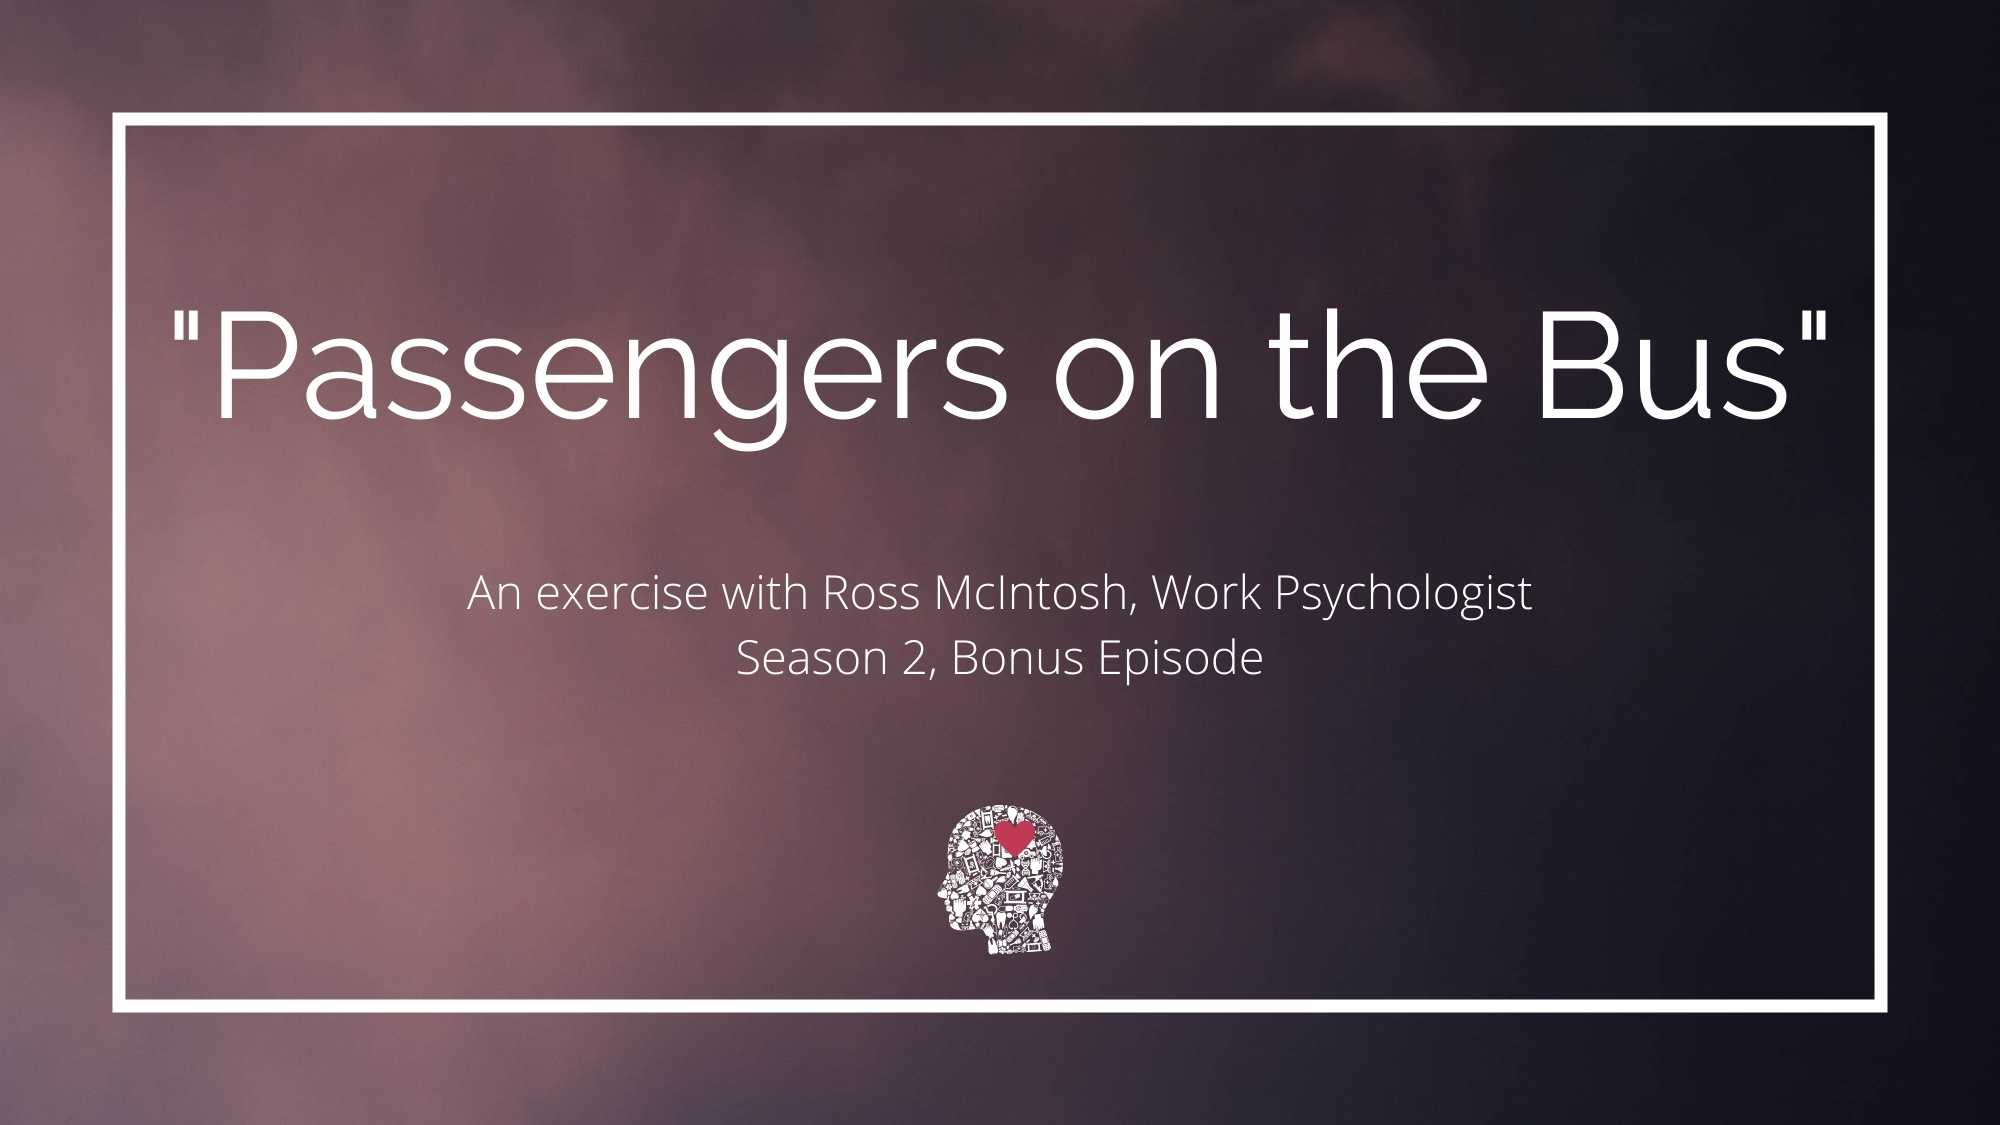 Passengers on the bus with Ross McIntosh